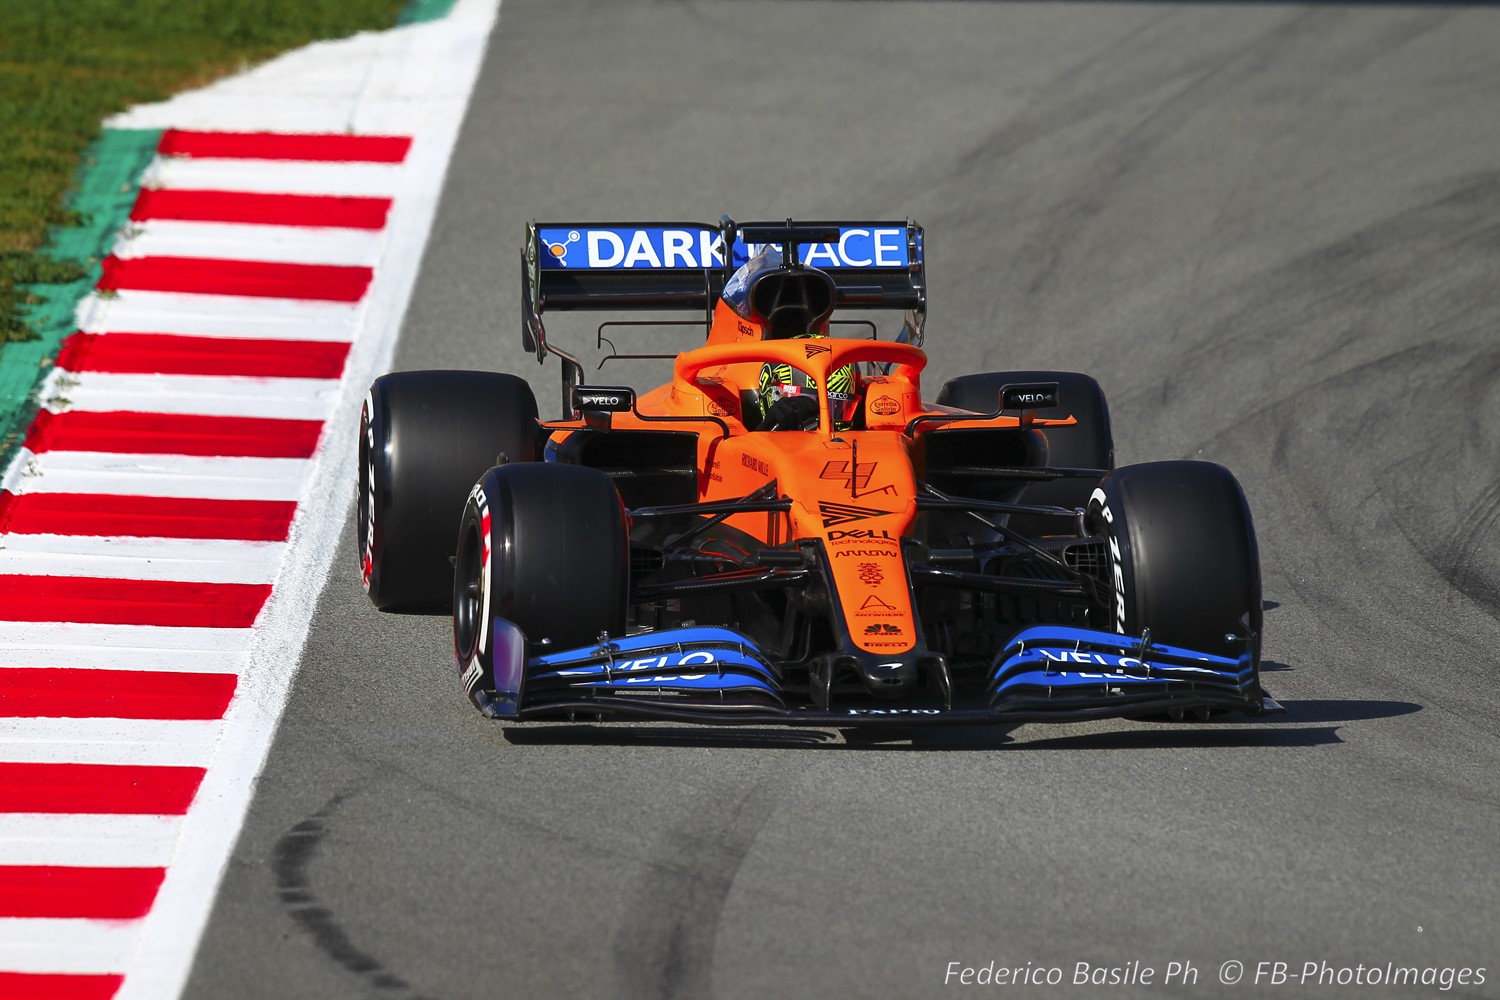 With the 2021 car delayed, switching to Mercedes will have cost implications for McLaren